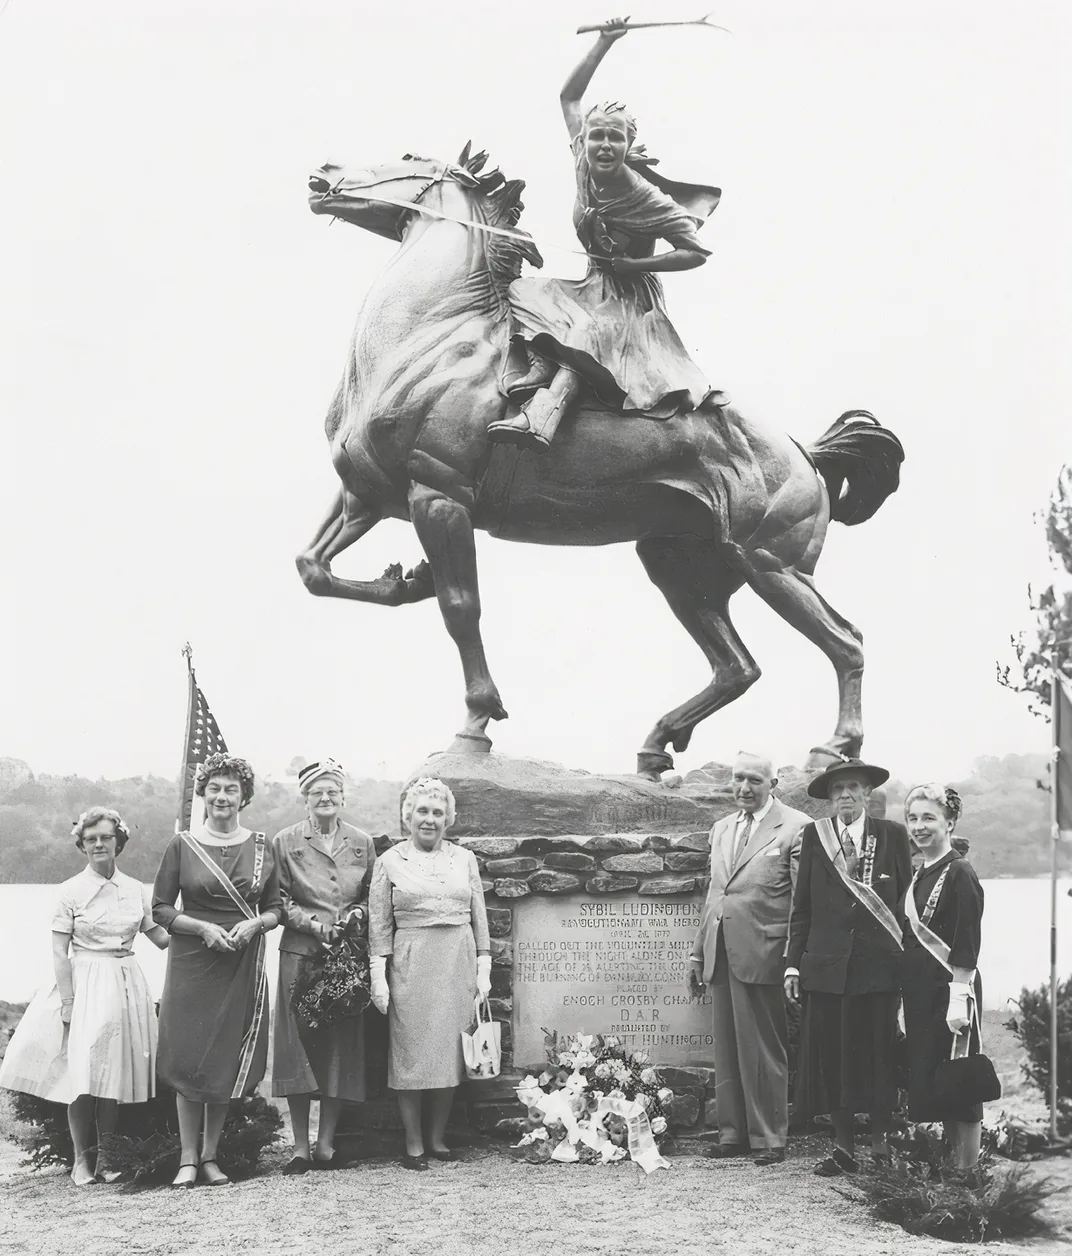 a group of people stand in a portrait in front of a statue of Sybil Ludington